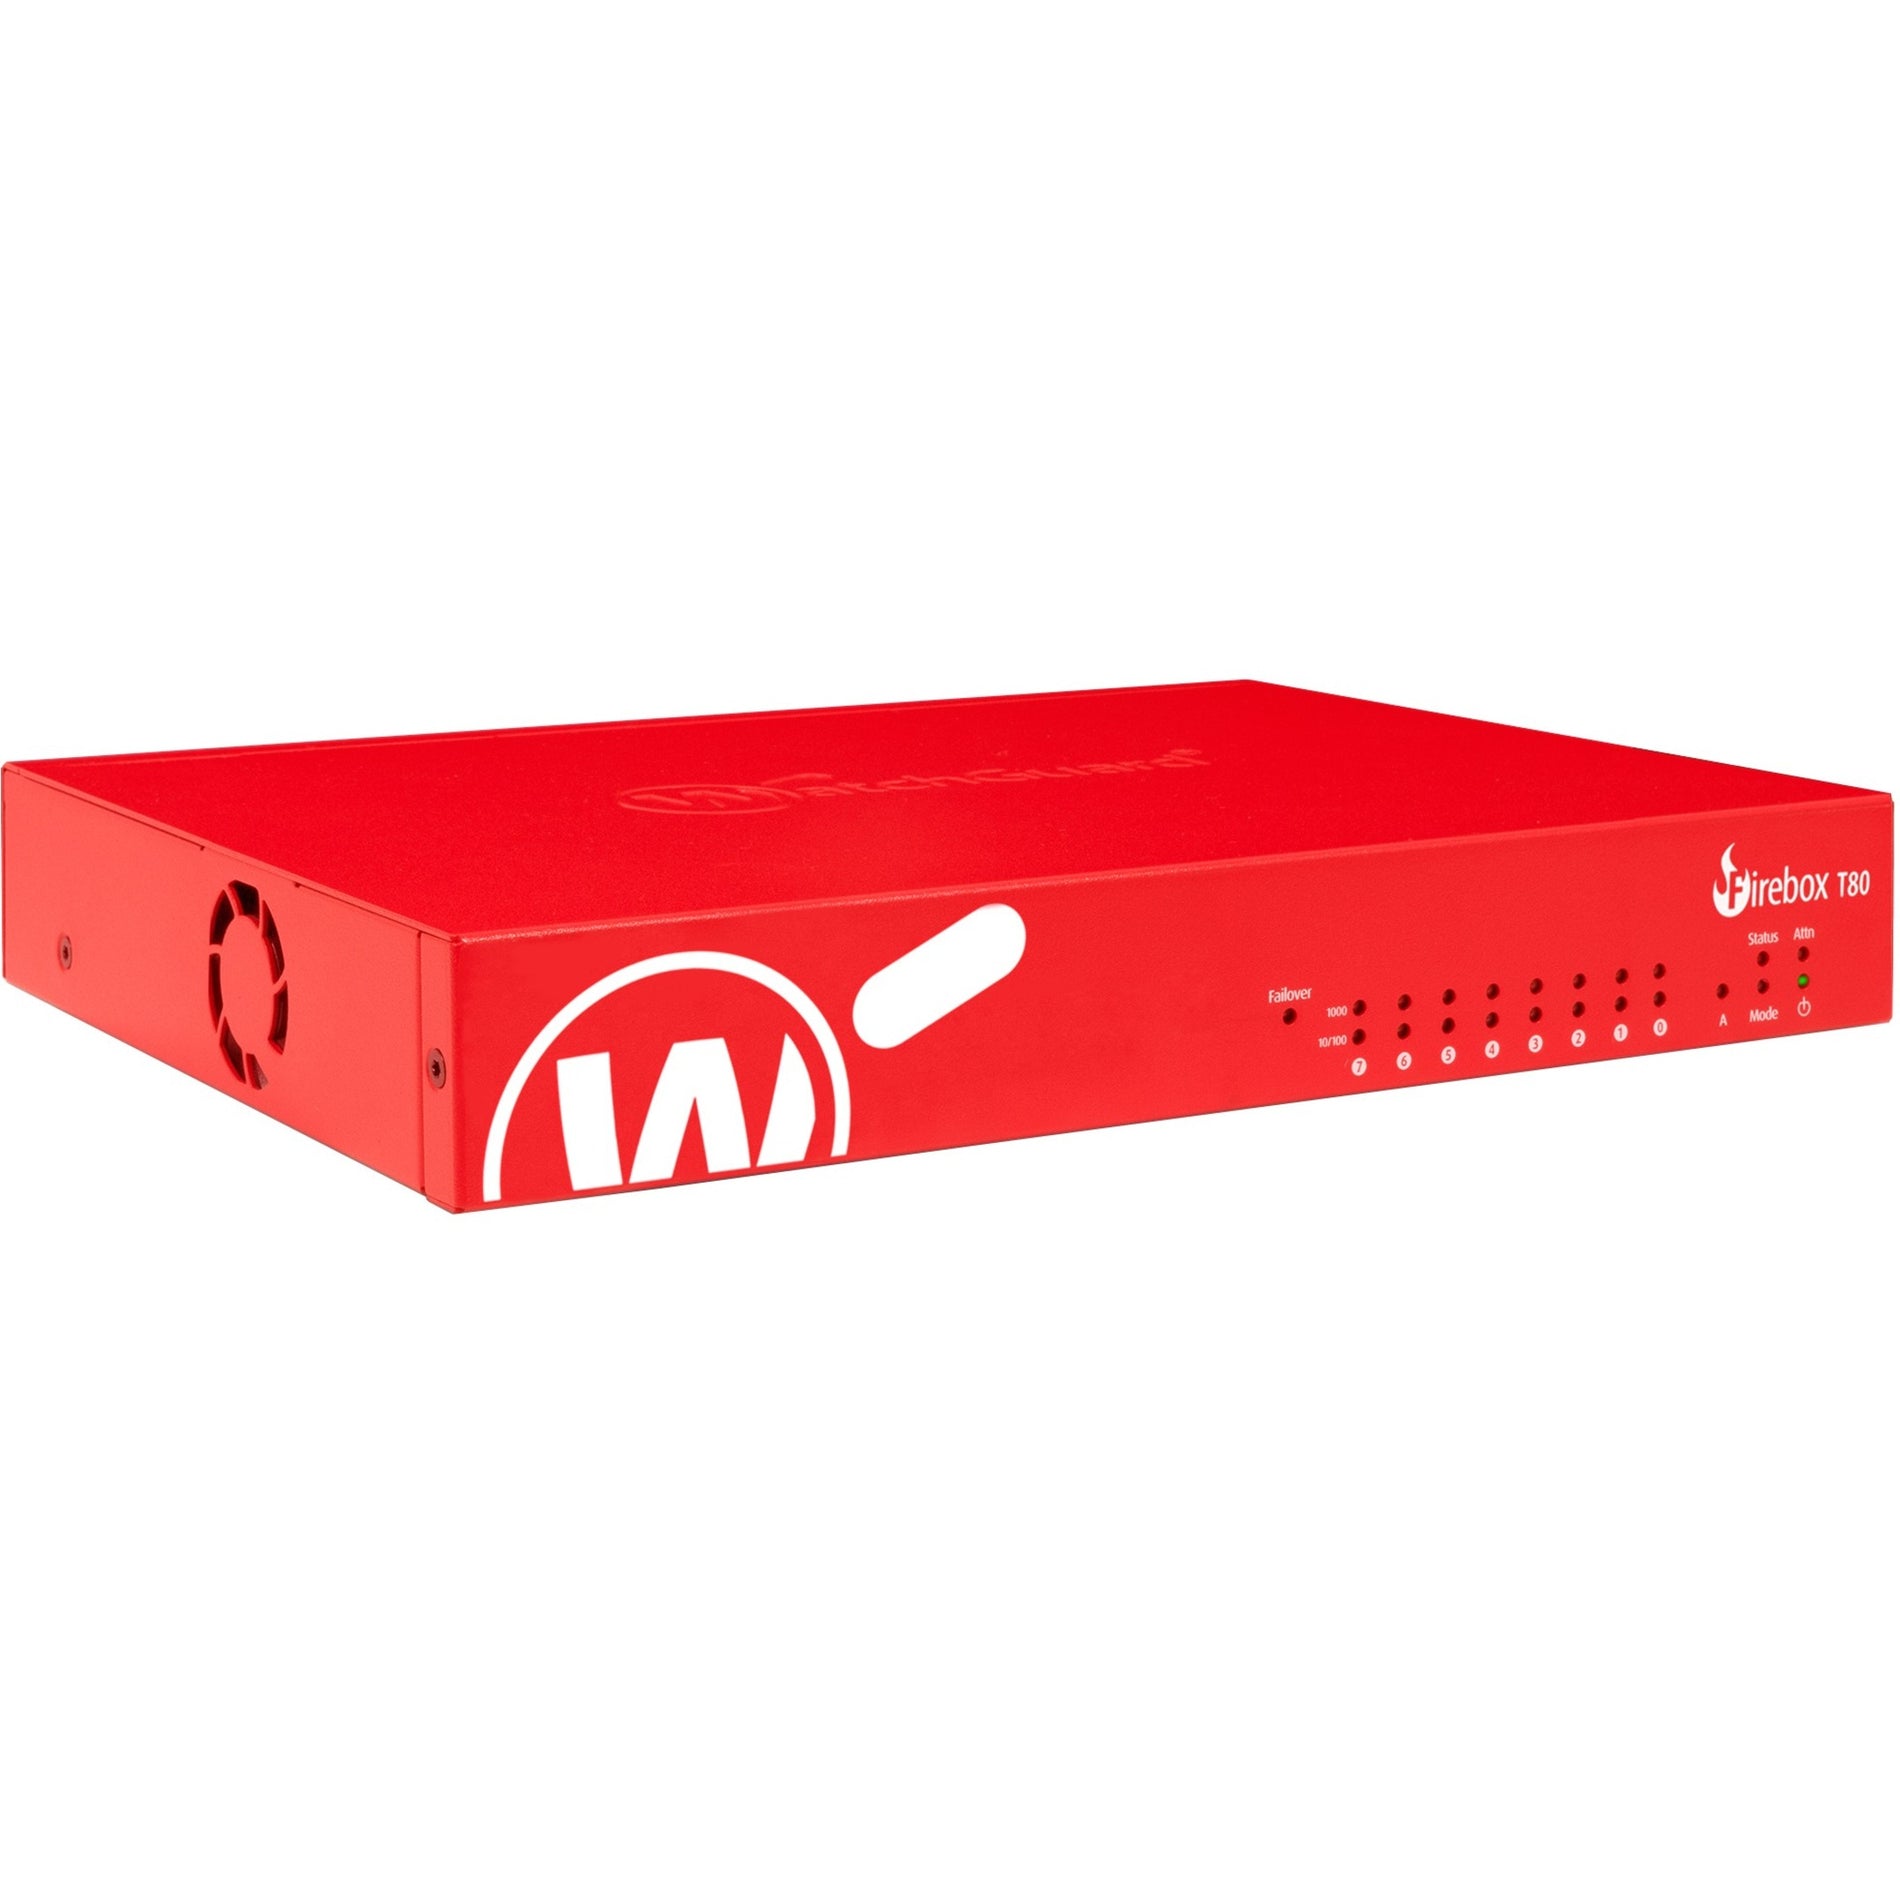 Trade Up to WatchGuard Firebox T80 with 1-yr Basic Security Suite (US) [Discontinued]